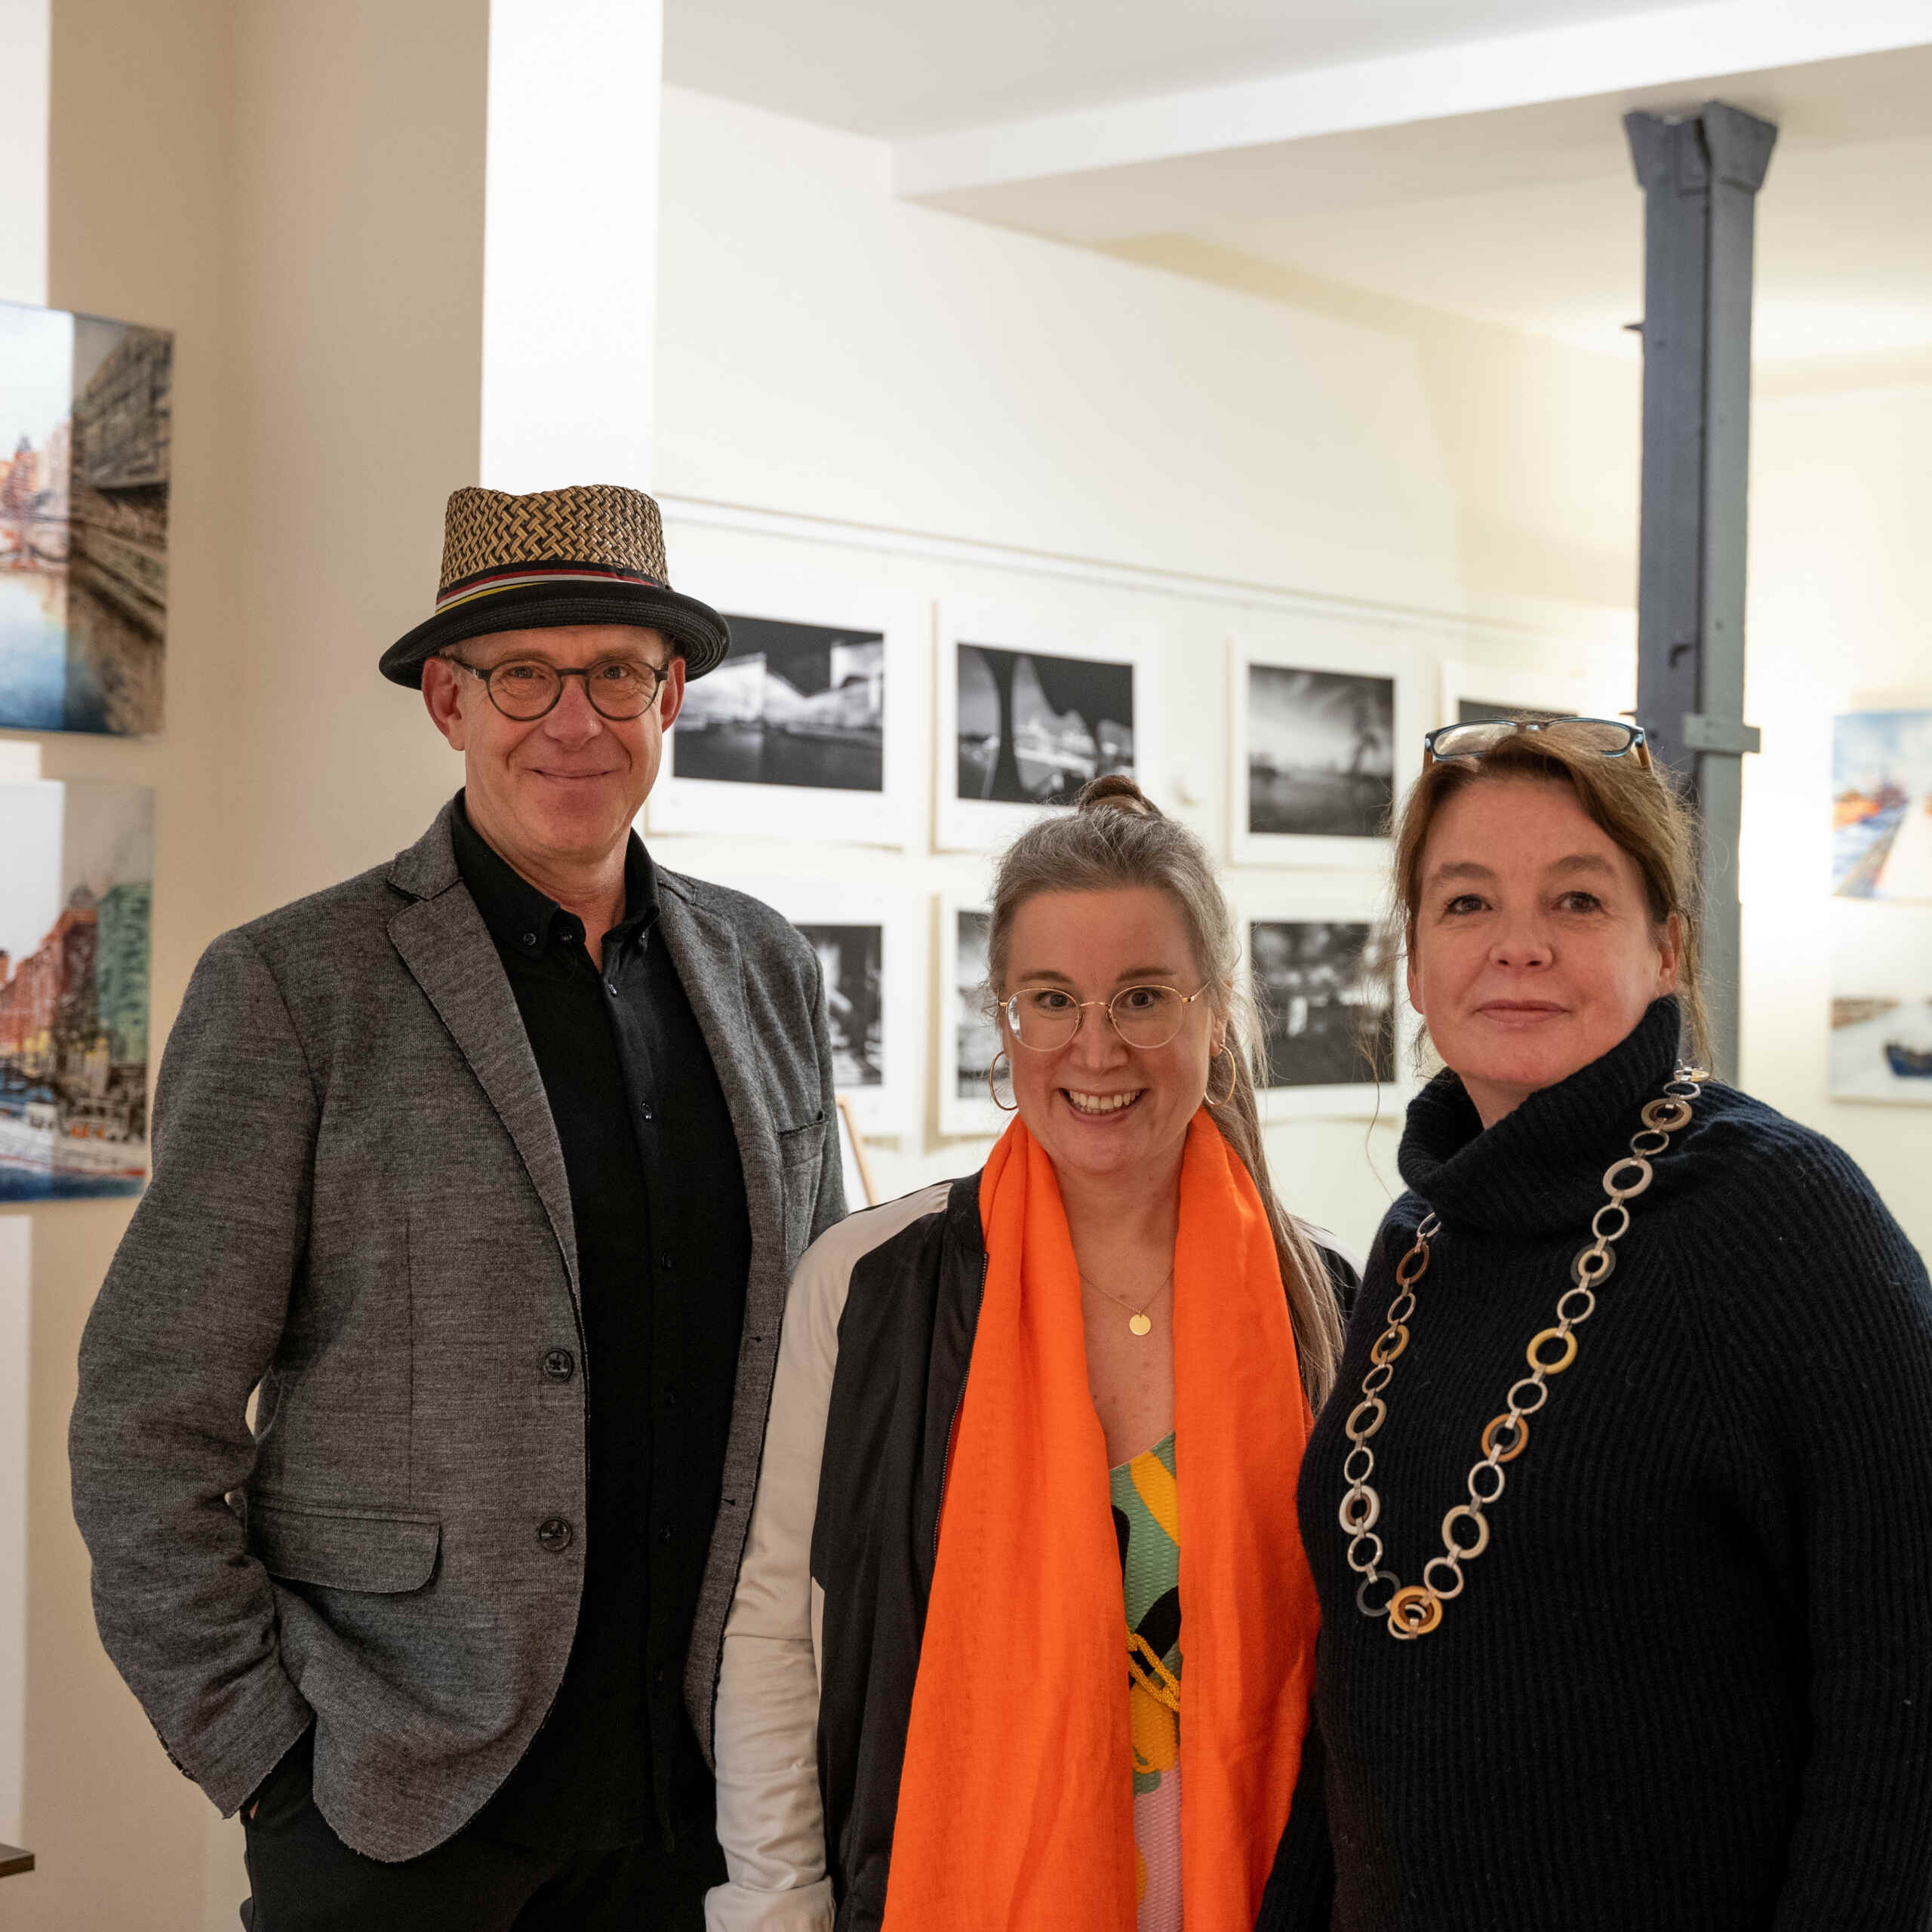 Artists Peter Schulte and Nina Groth and gallery owner Claudia Tonn at the exhibition "City Walks" in the gallery "Die kleine Galerie in Flottbek" in Hamburg